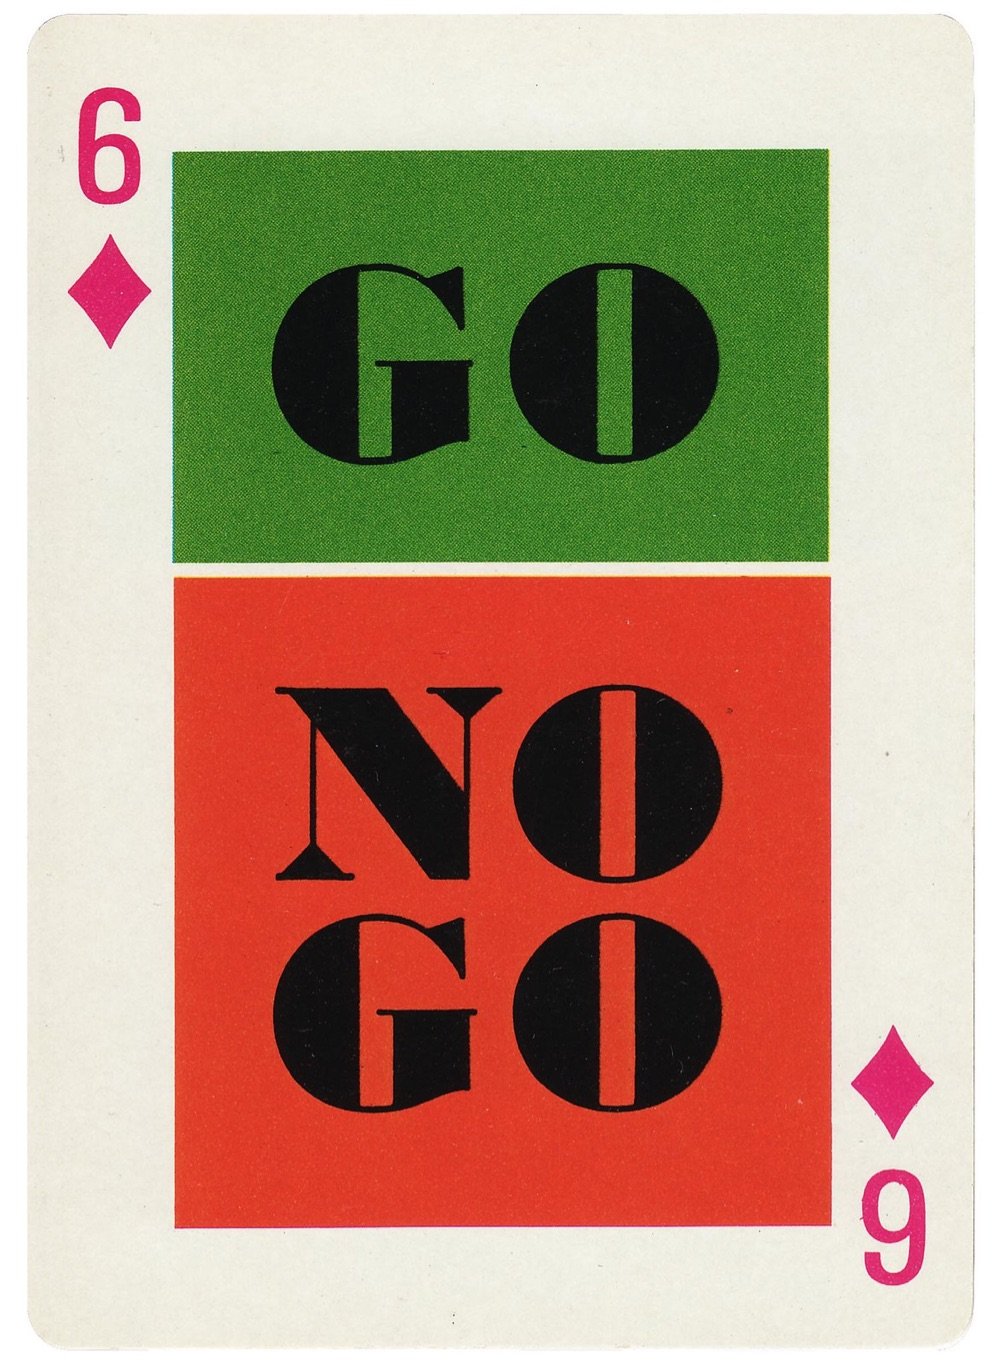 six of diamonds playing card with GO and NO GO printed on it